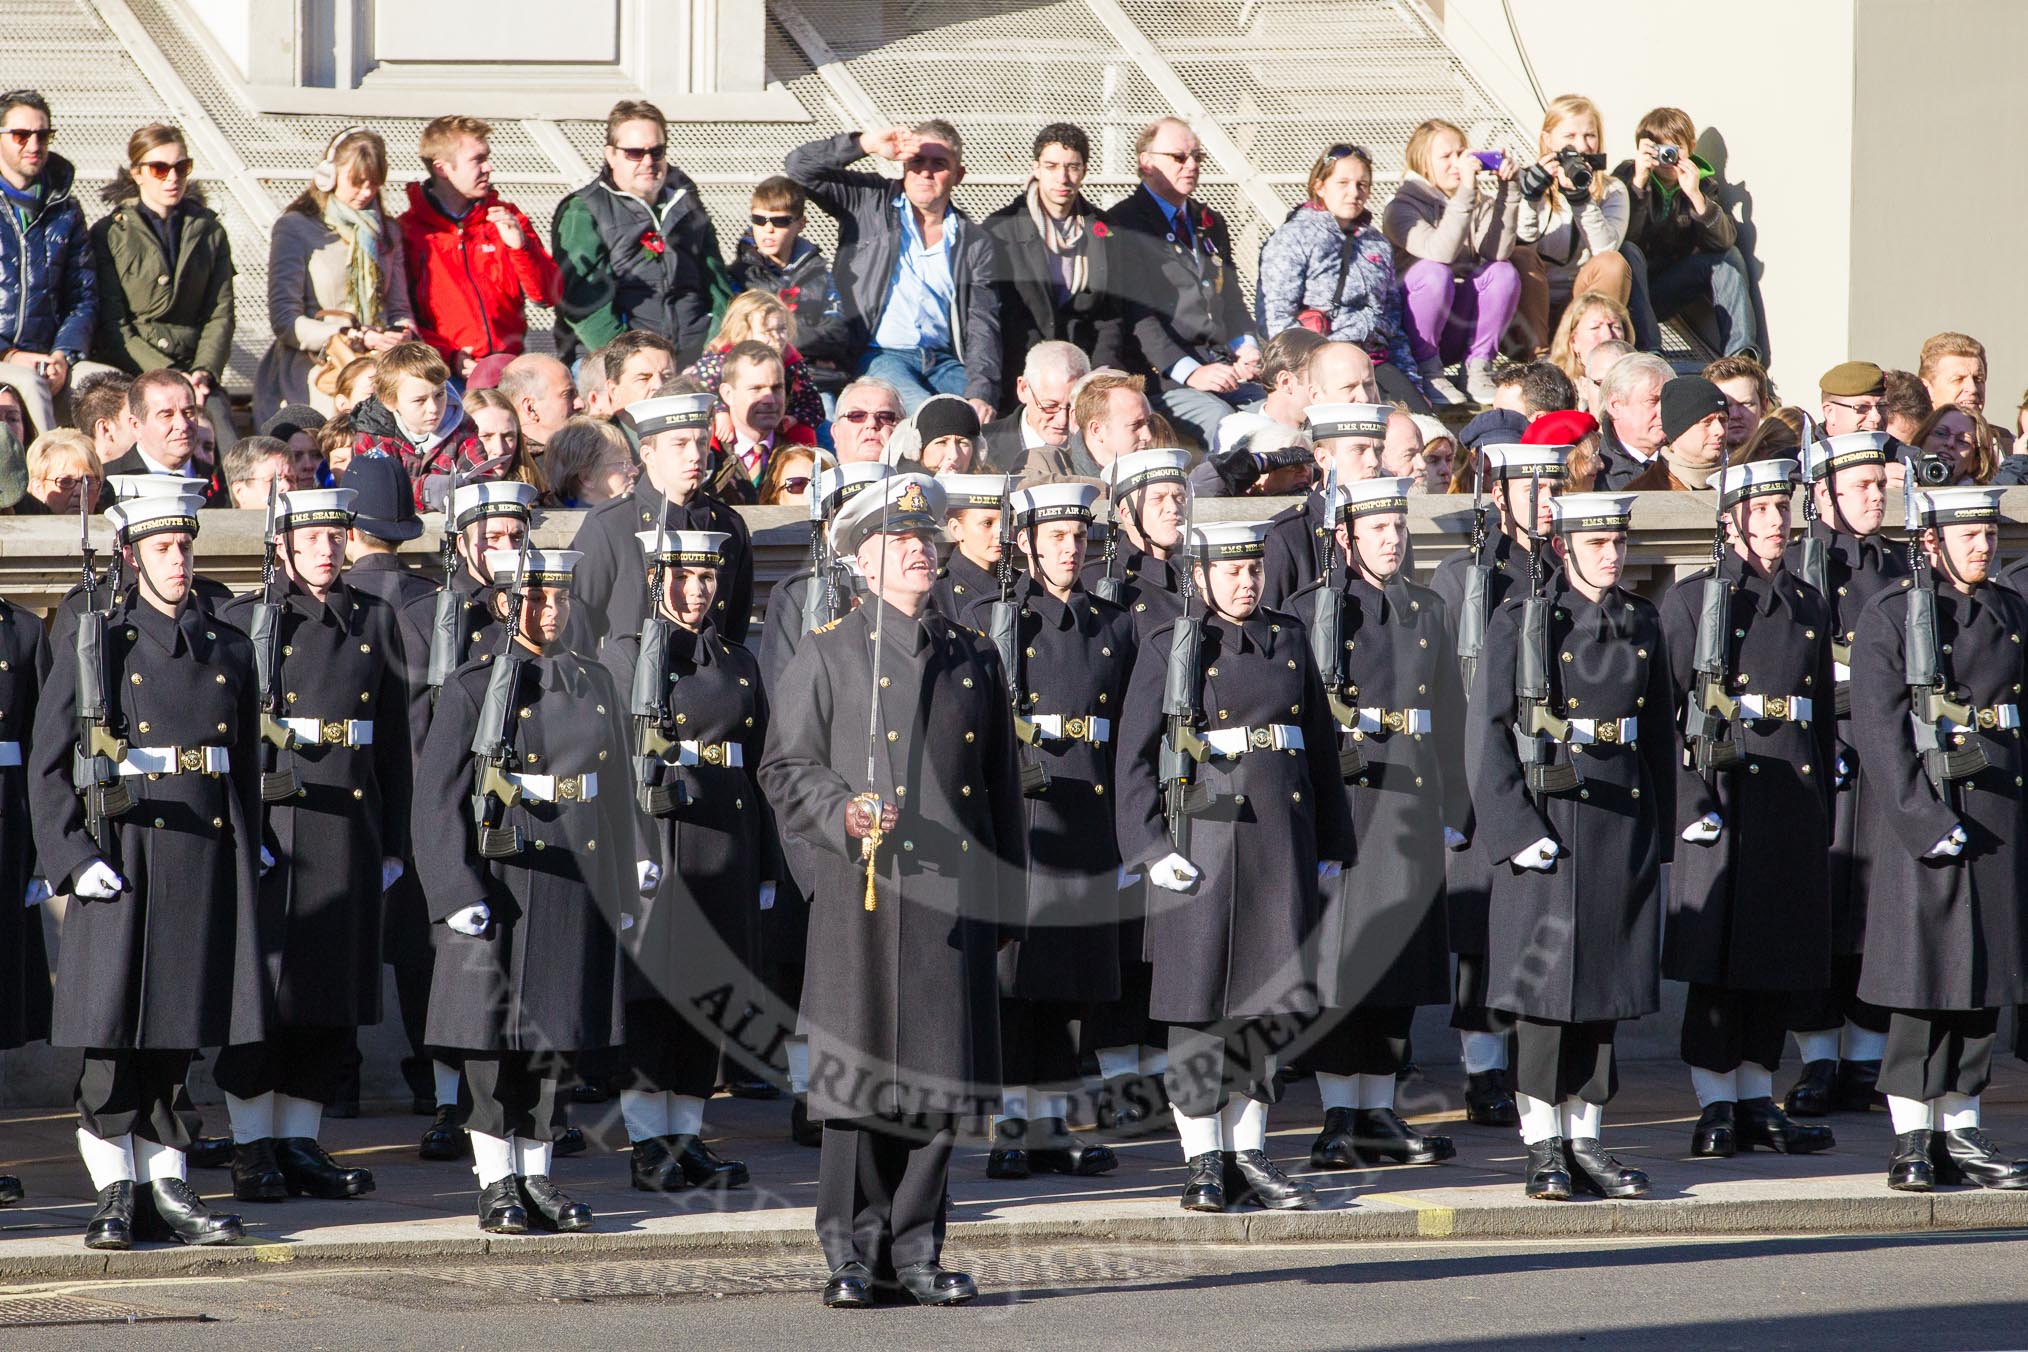 10:22am - the detachment of the Royal Navy in position northeast of the Cenotaph.